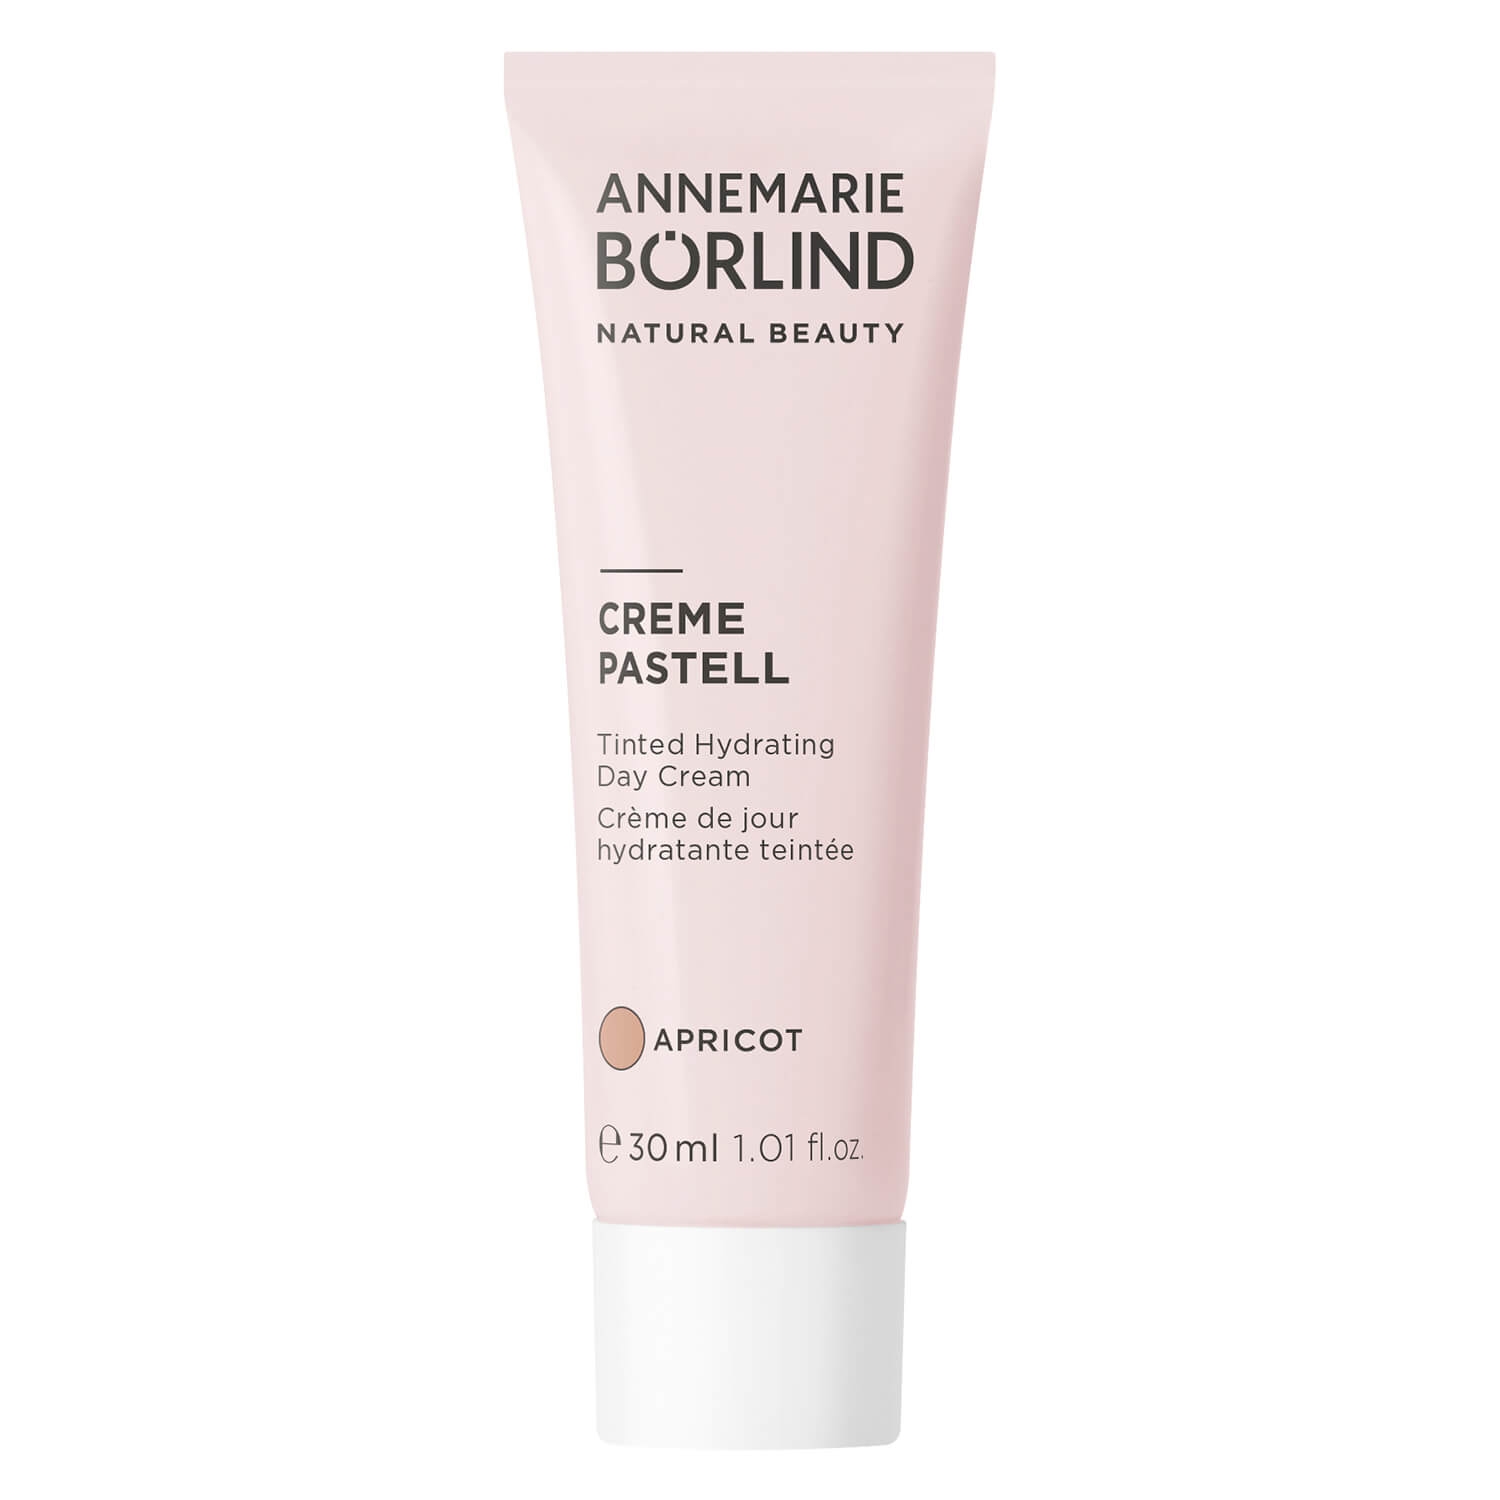 Product image from Annemarie Börlind Teint - Creme Pastell Getönte Tagescreme Apricot